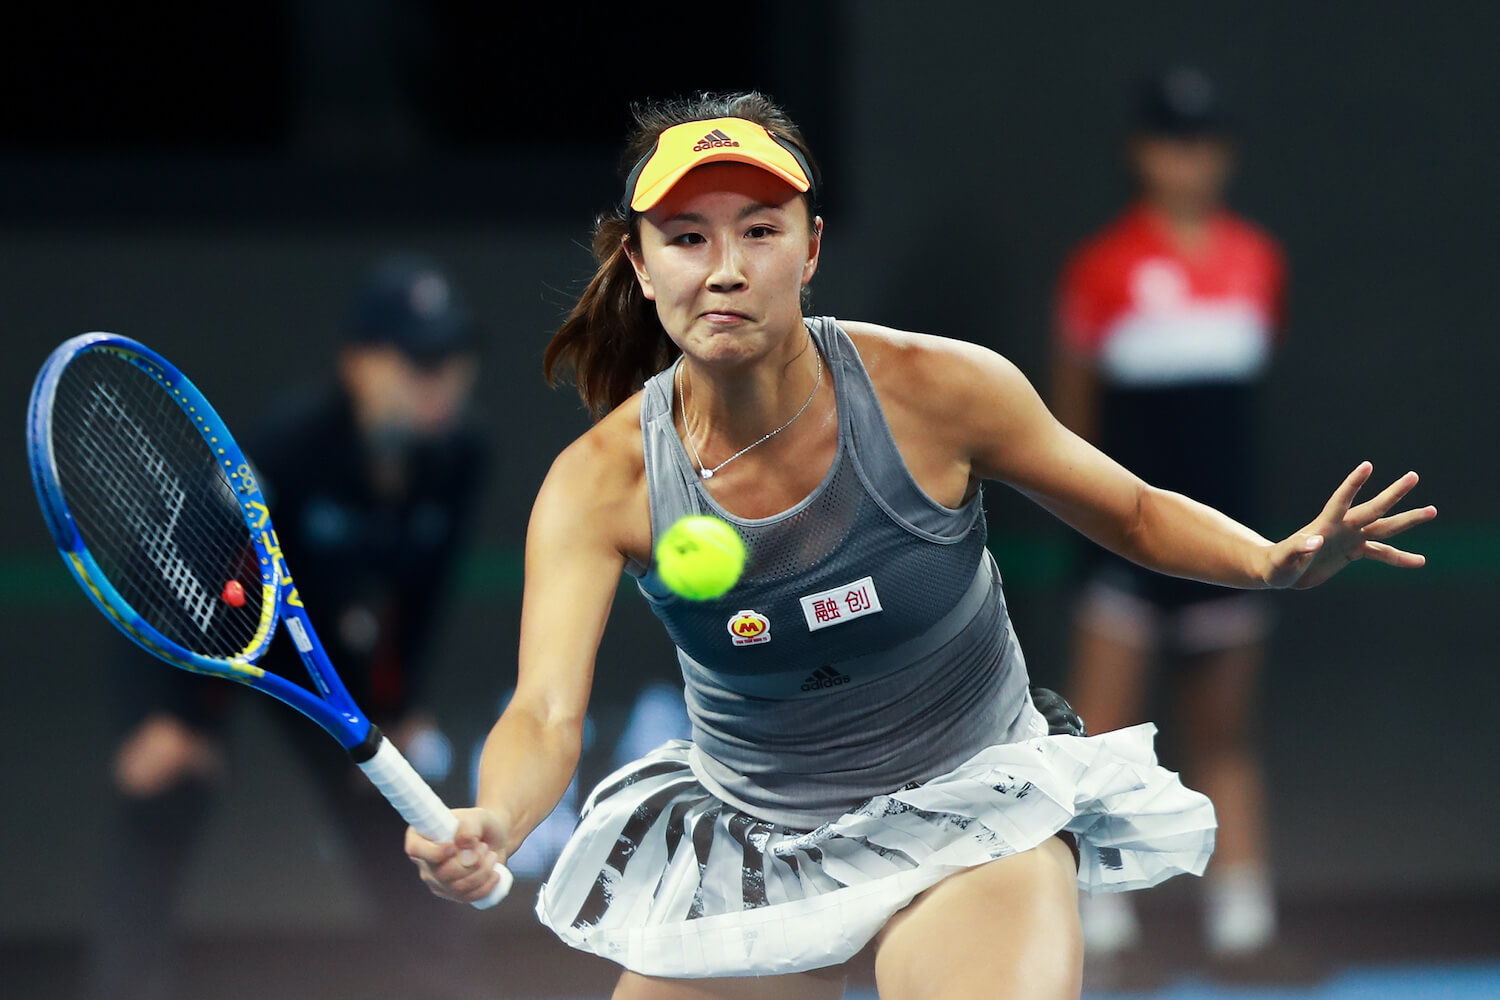 WTA Suspends All Tournaments in China Over Peng Shuai Safety Concerns